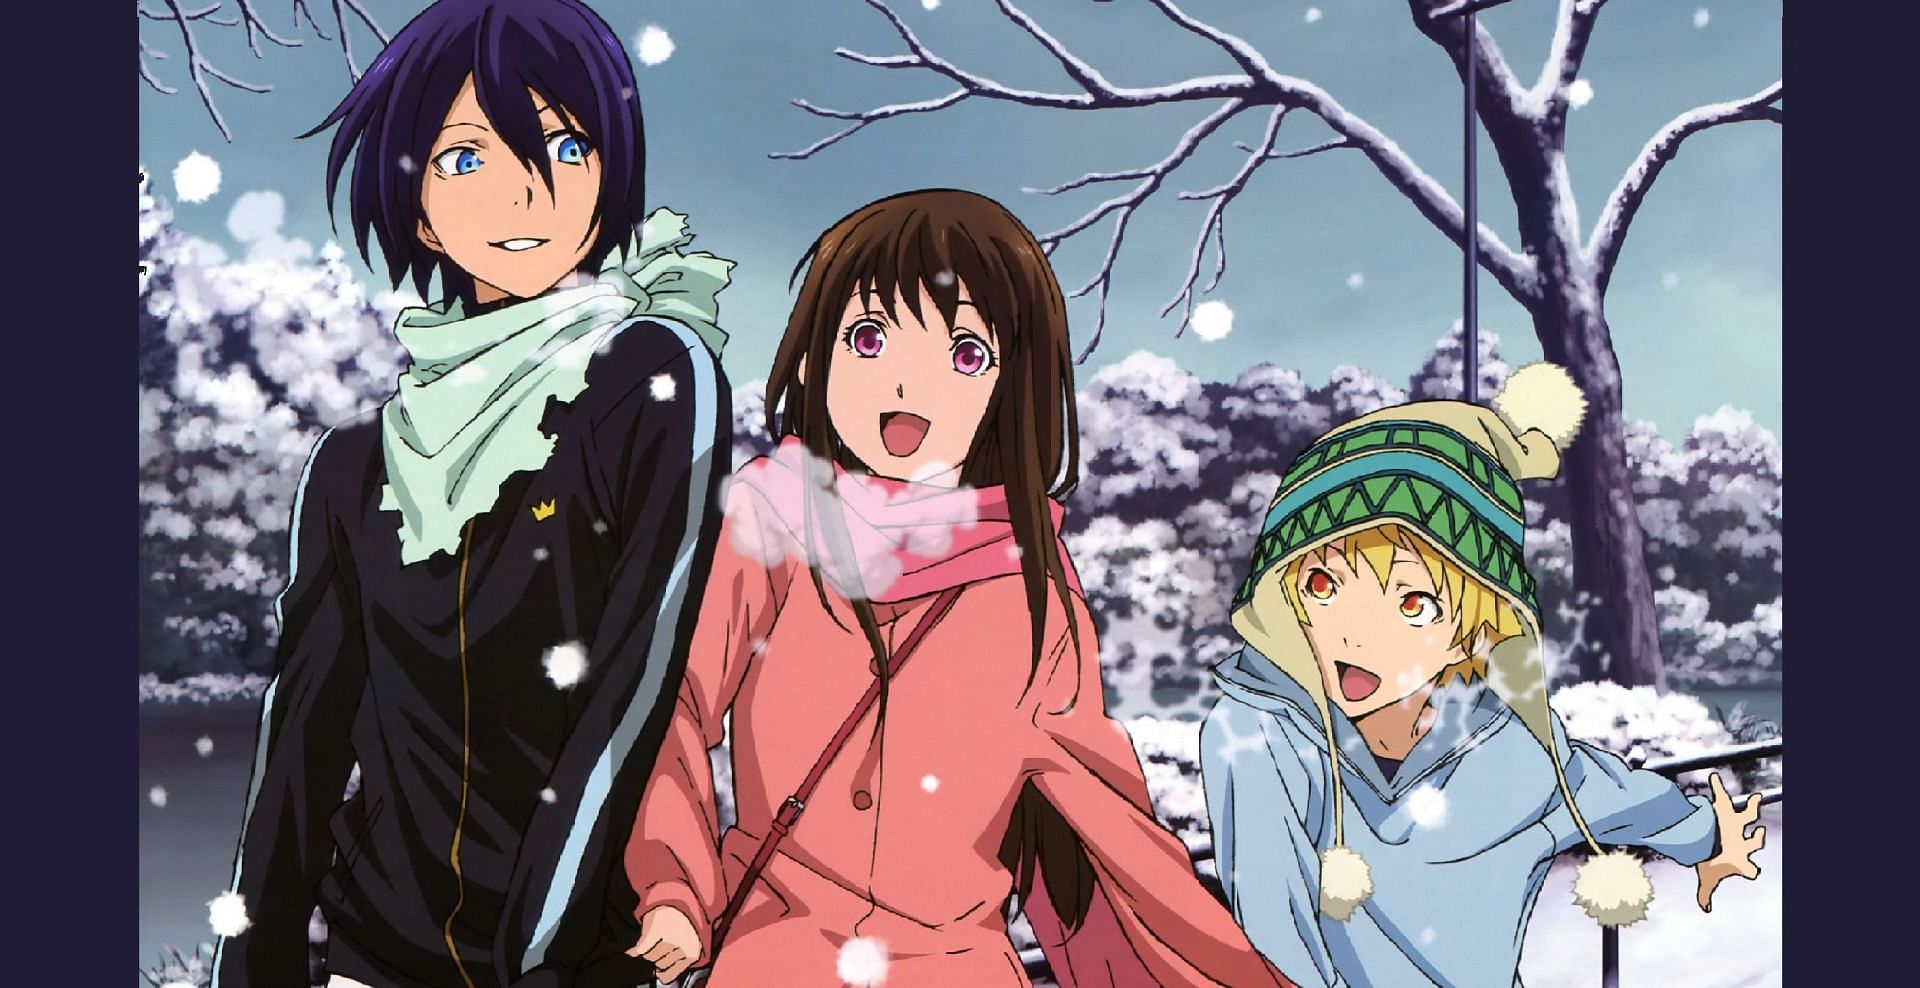 10 mythological anime to watch if you loved Noragami